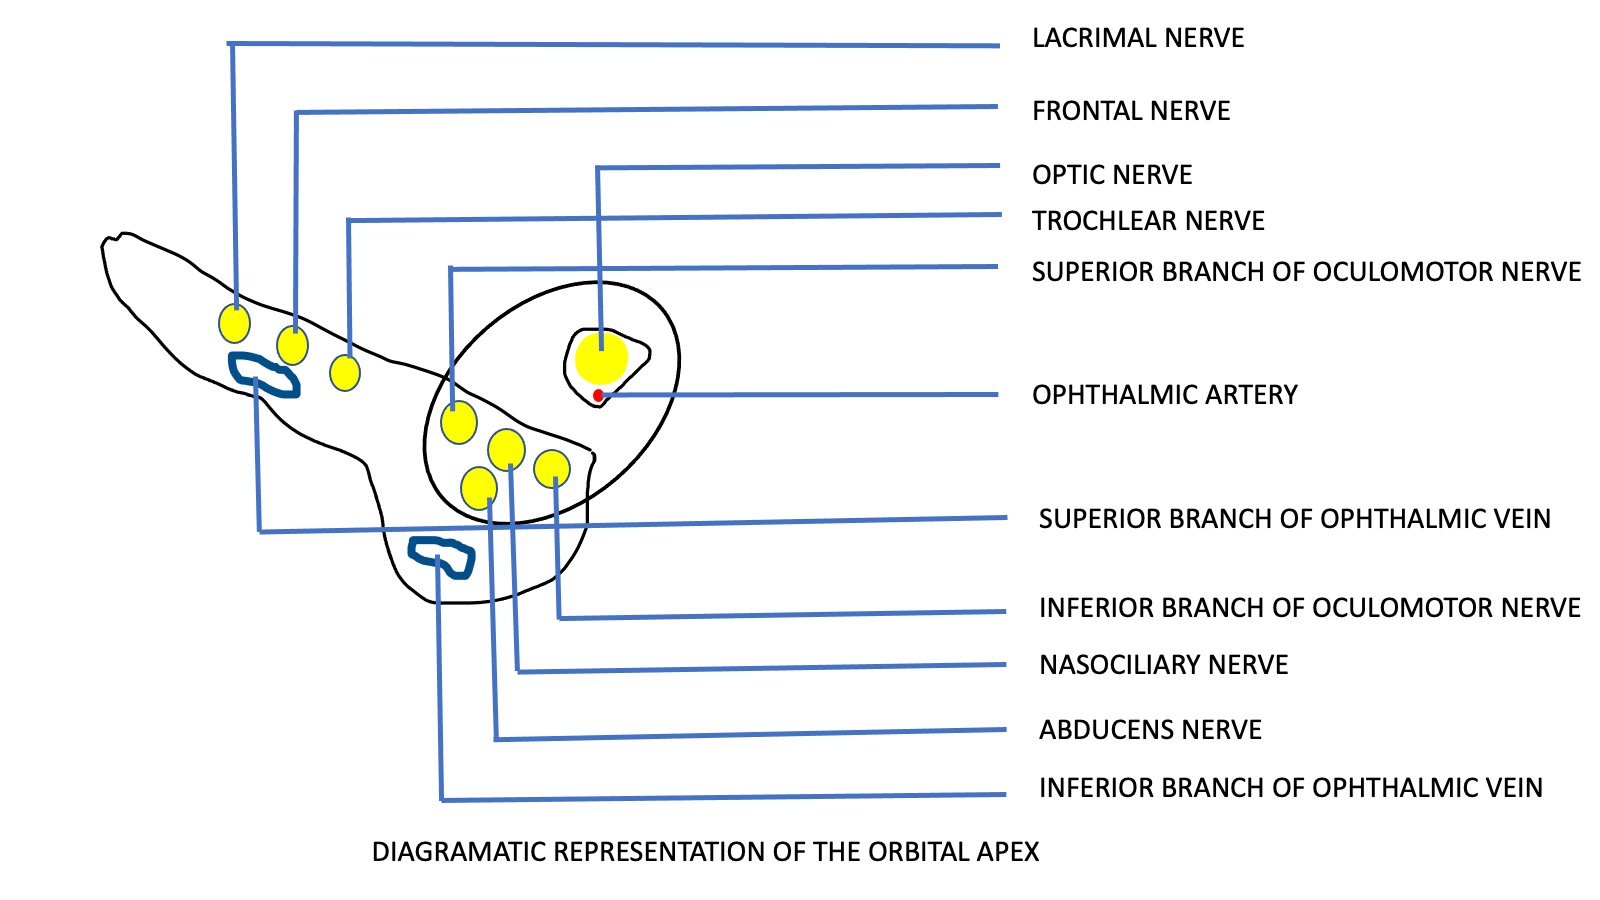 Schematic representation of the orbital apex showing the contents of the optic canal and superior orbital fissure